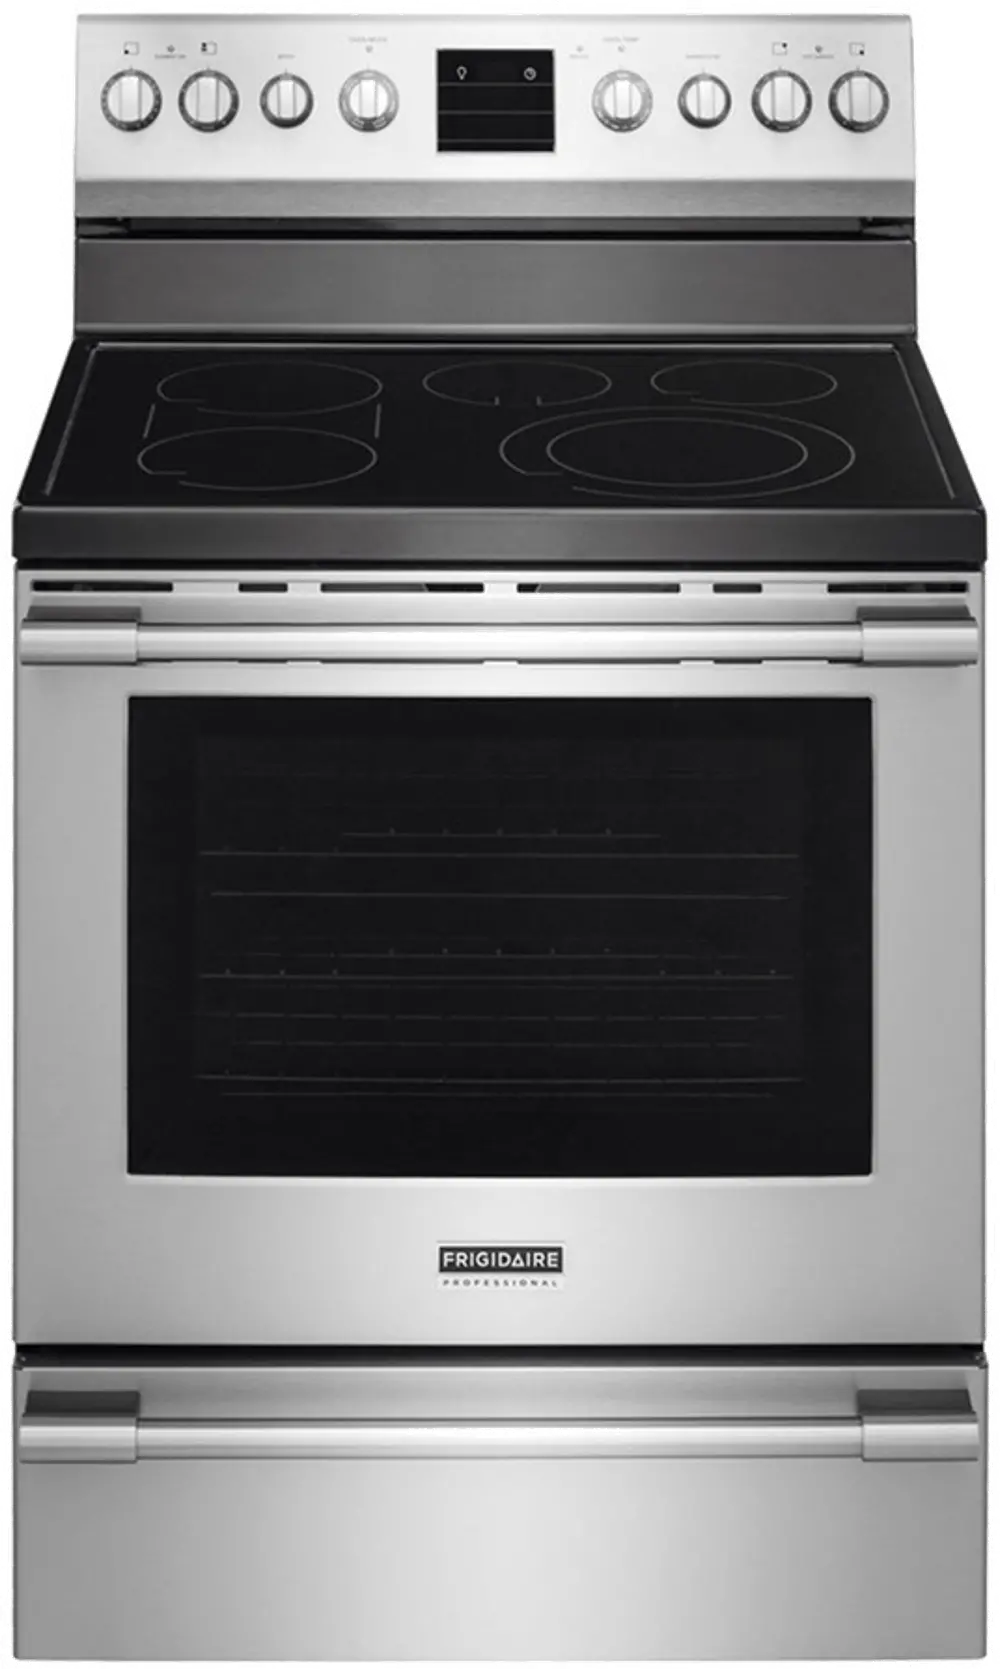 FPEF3077QF Frigidaire Professional Electric Range - 6.1 cu. ft. Stainless Steel-1